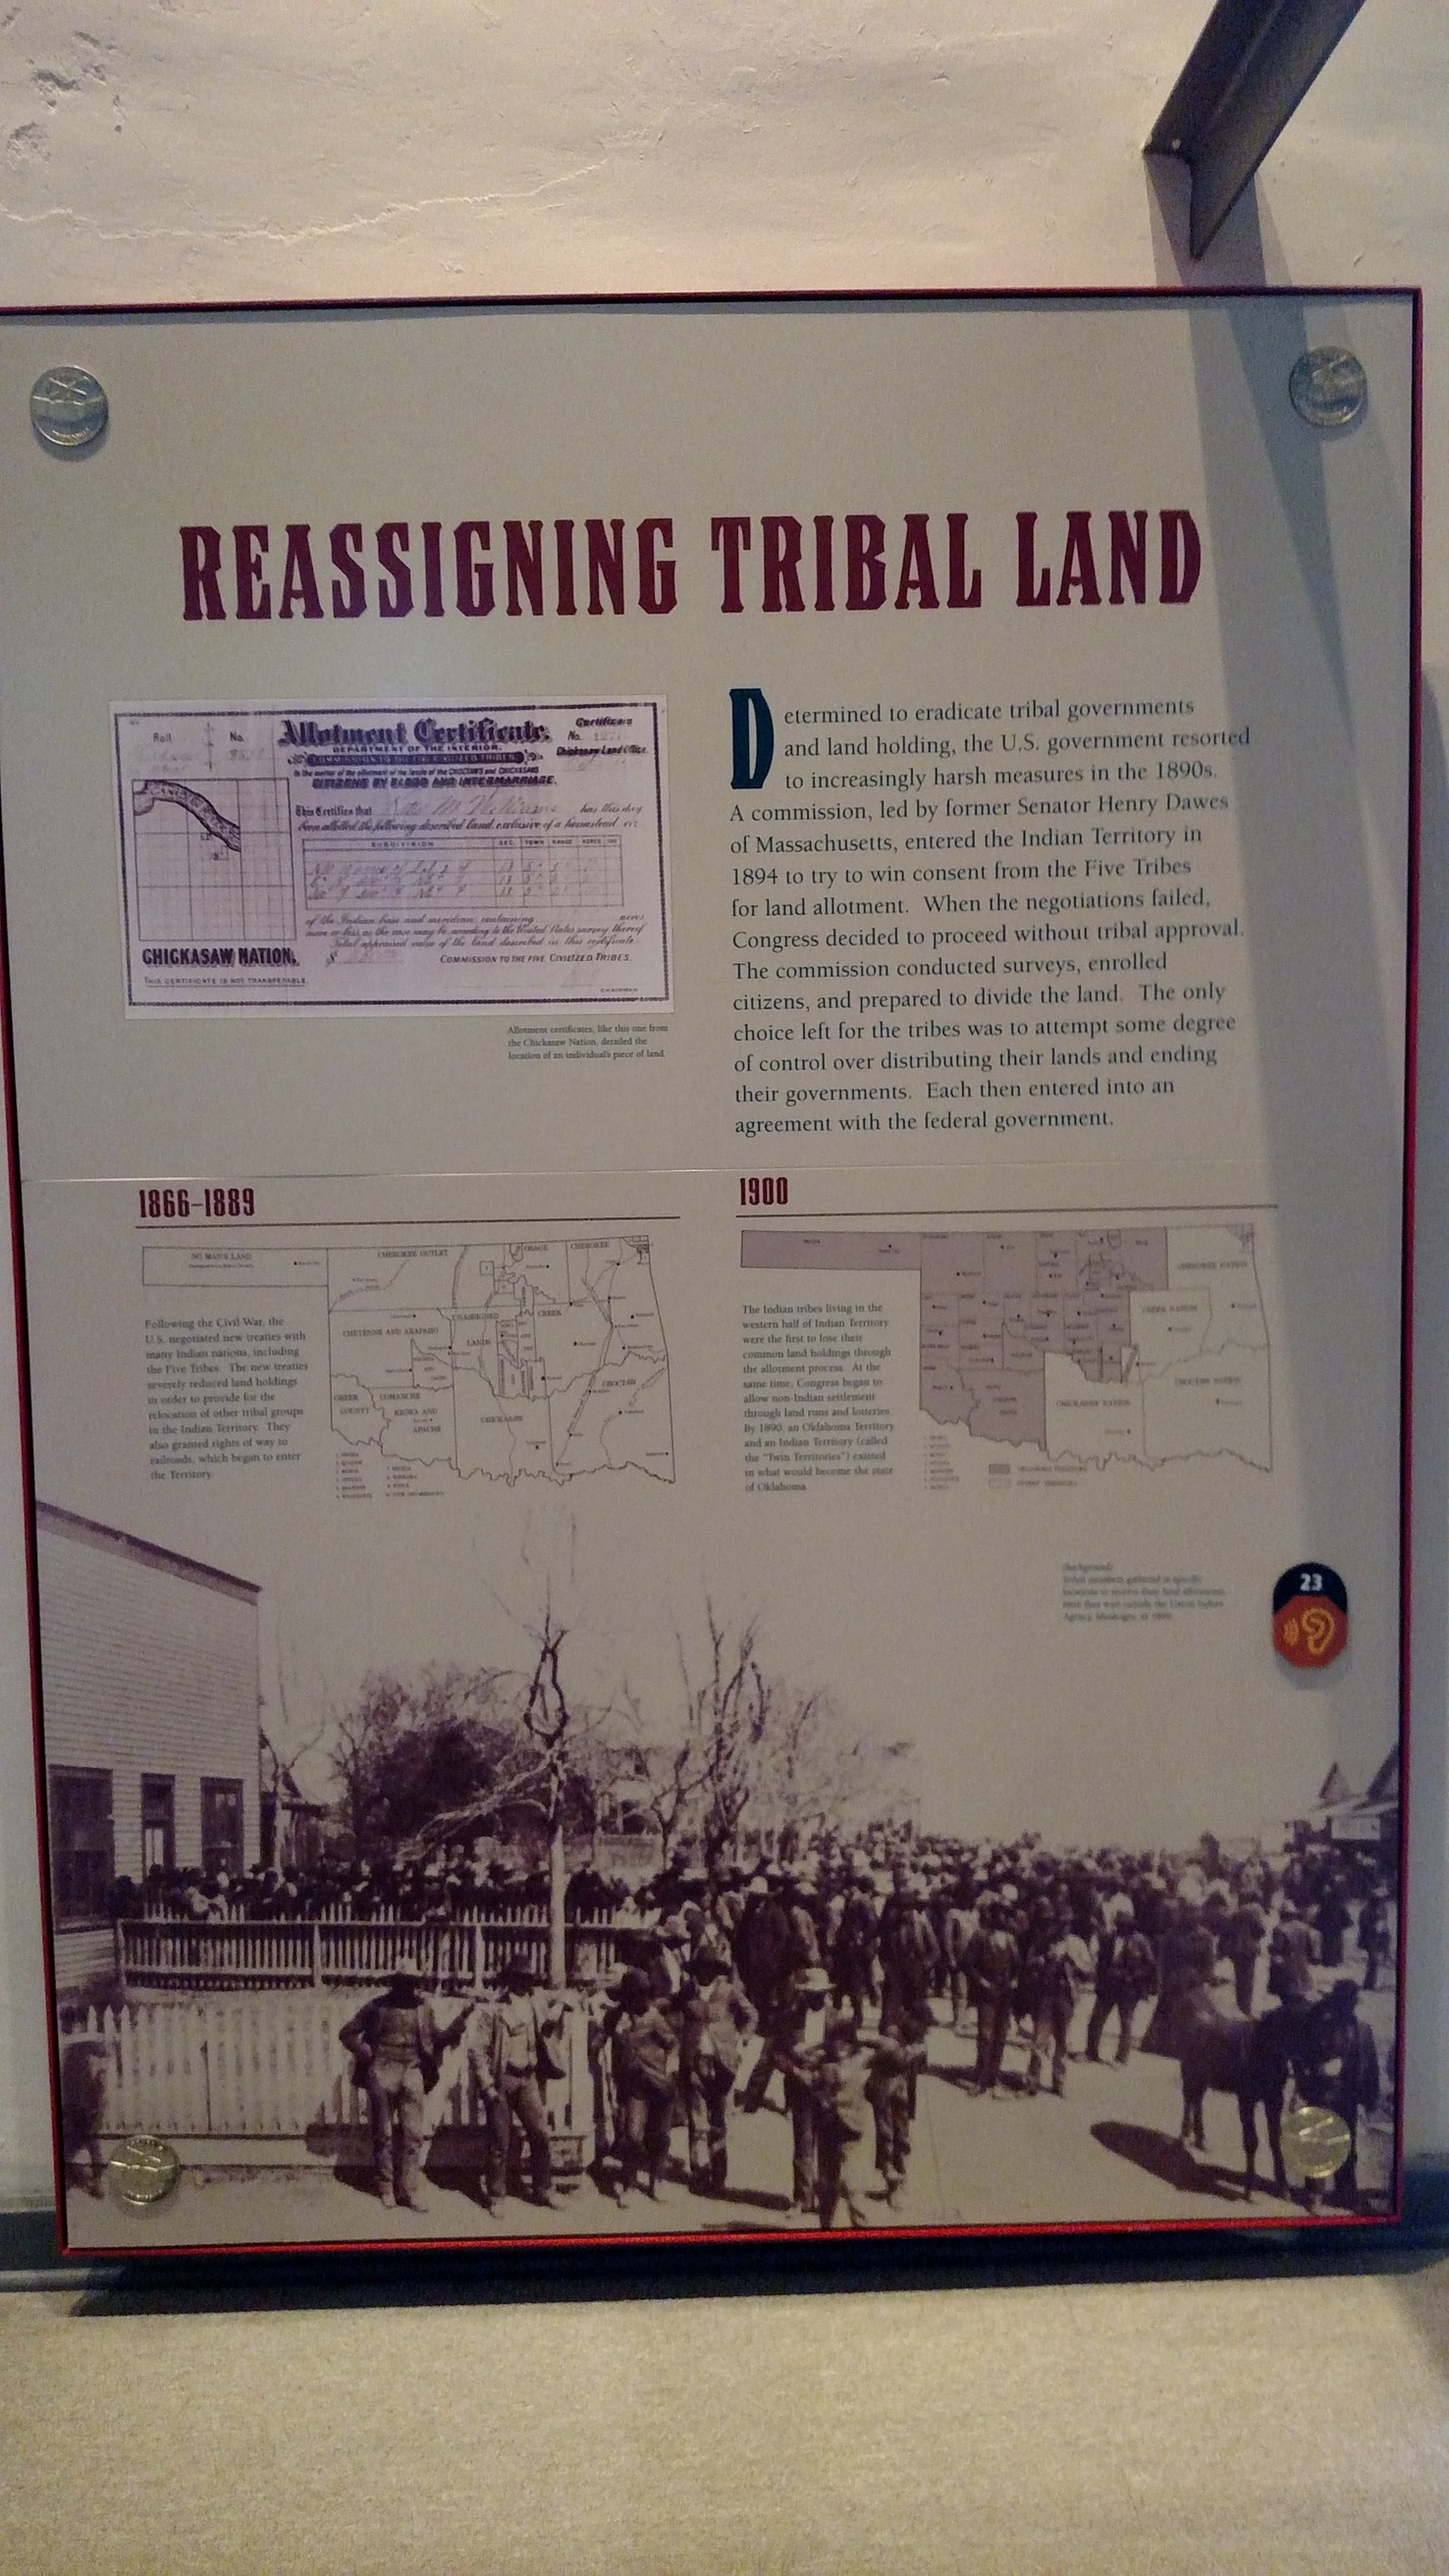 Reassigning Tribal Land exhibit panel at the Fort Smith National Historic Site Visitor Center Museum in Fort Smith, Arkansas